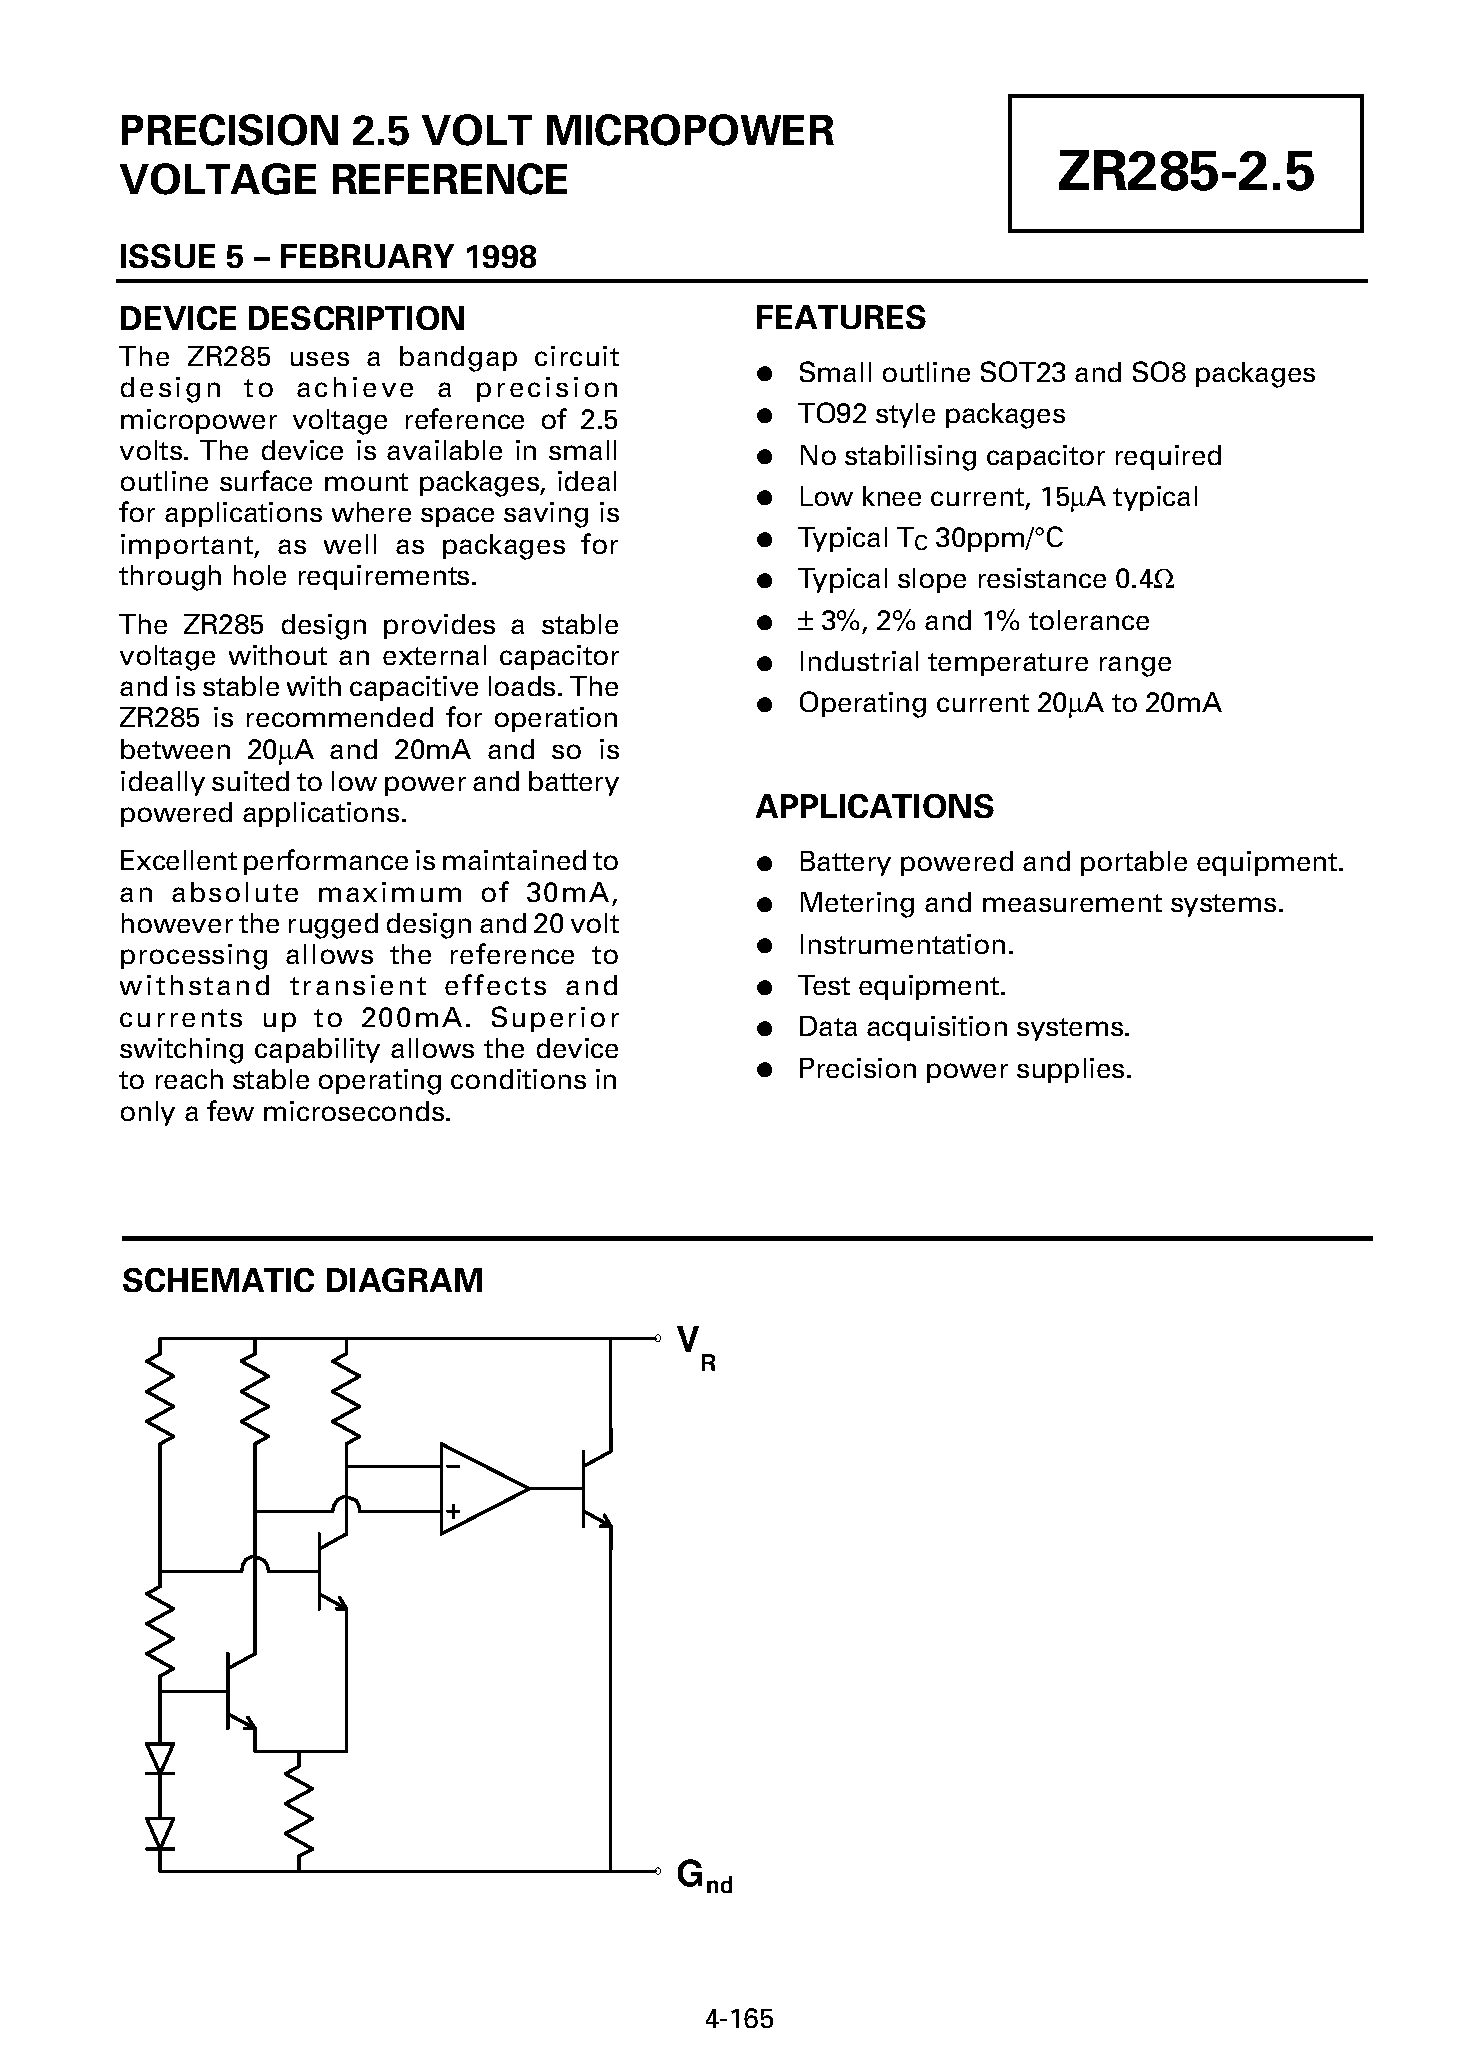 Datasheet ZR285F03 - PRECISION 2.5 VOLT MICROPOWER VOLTAGE REFERENCE page 1